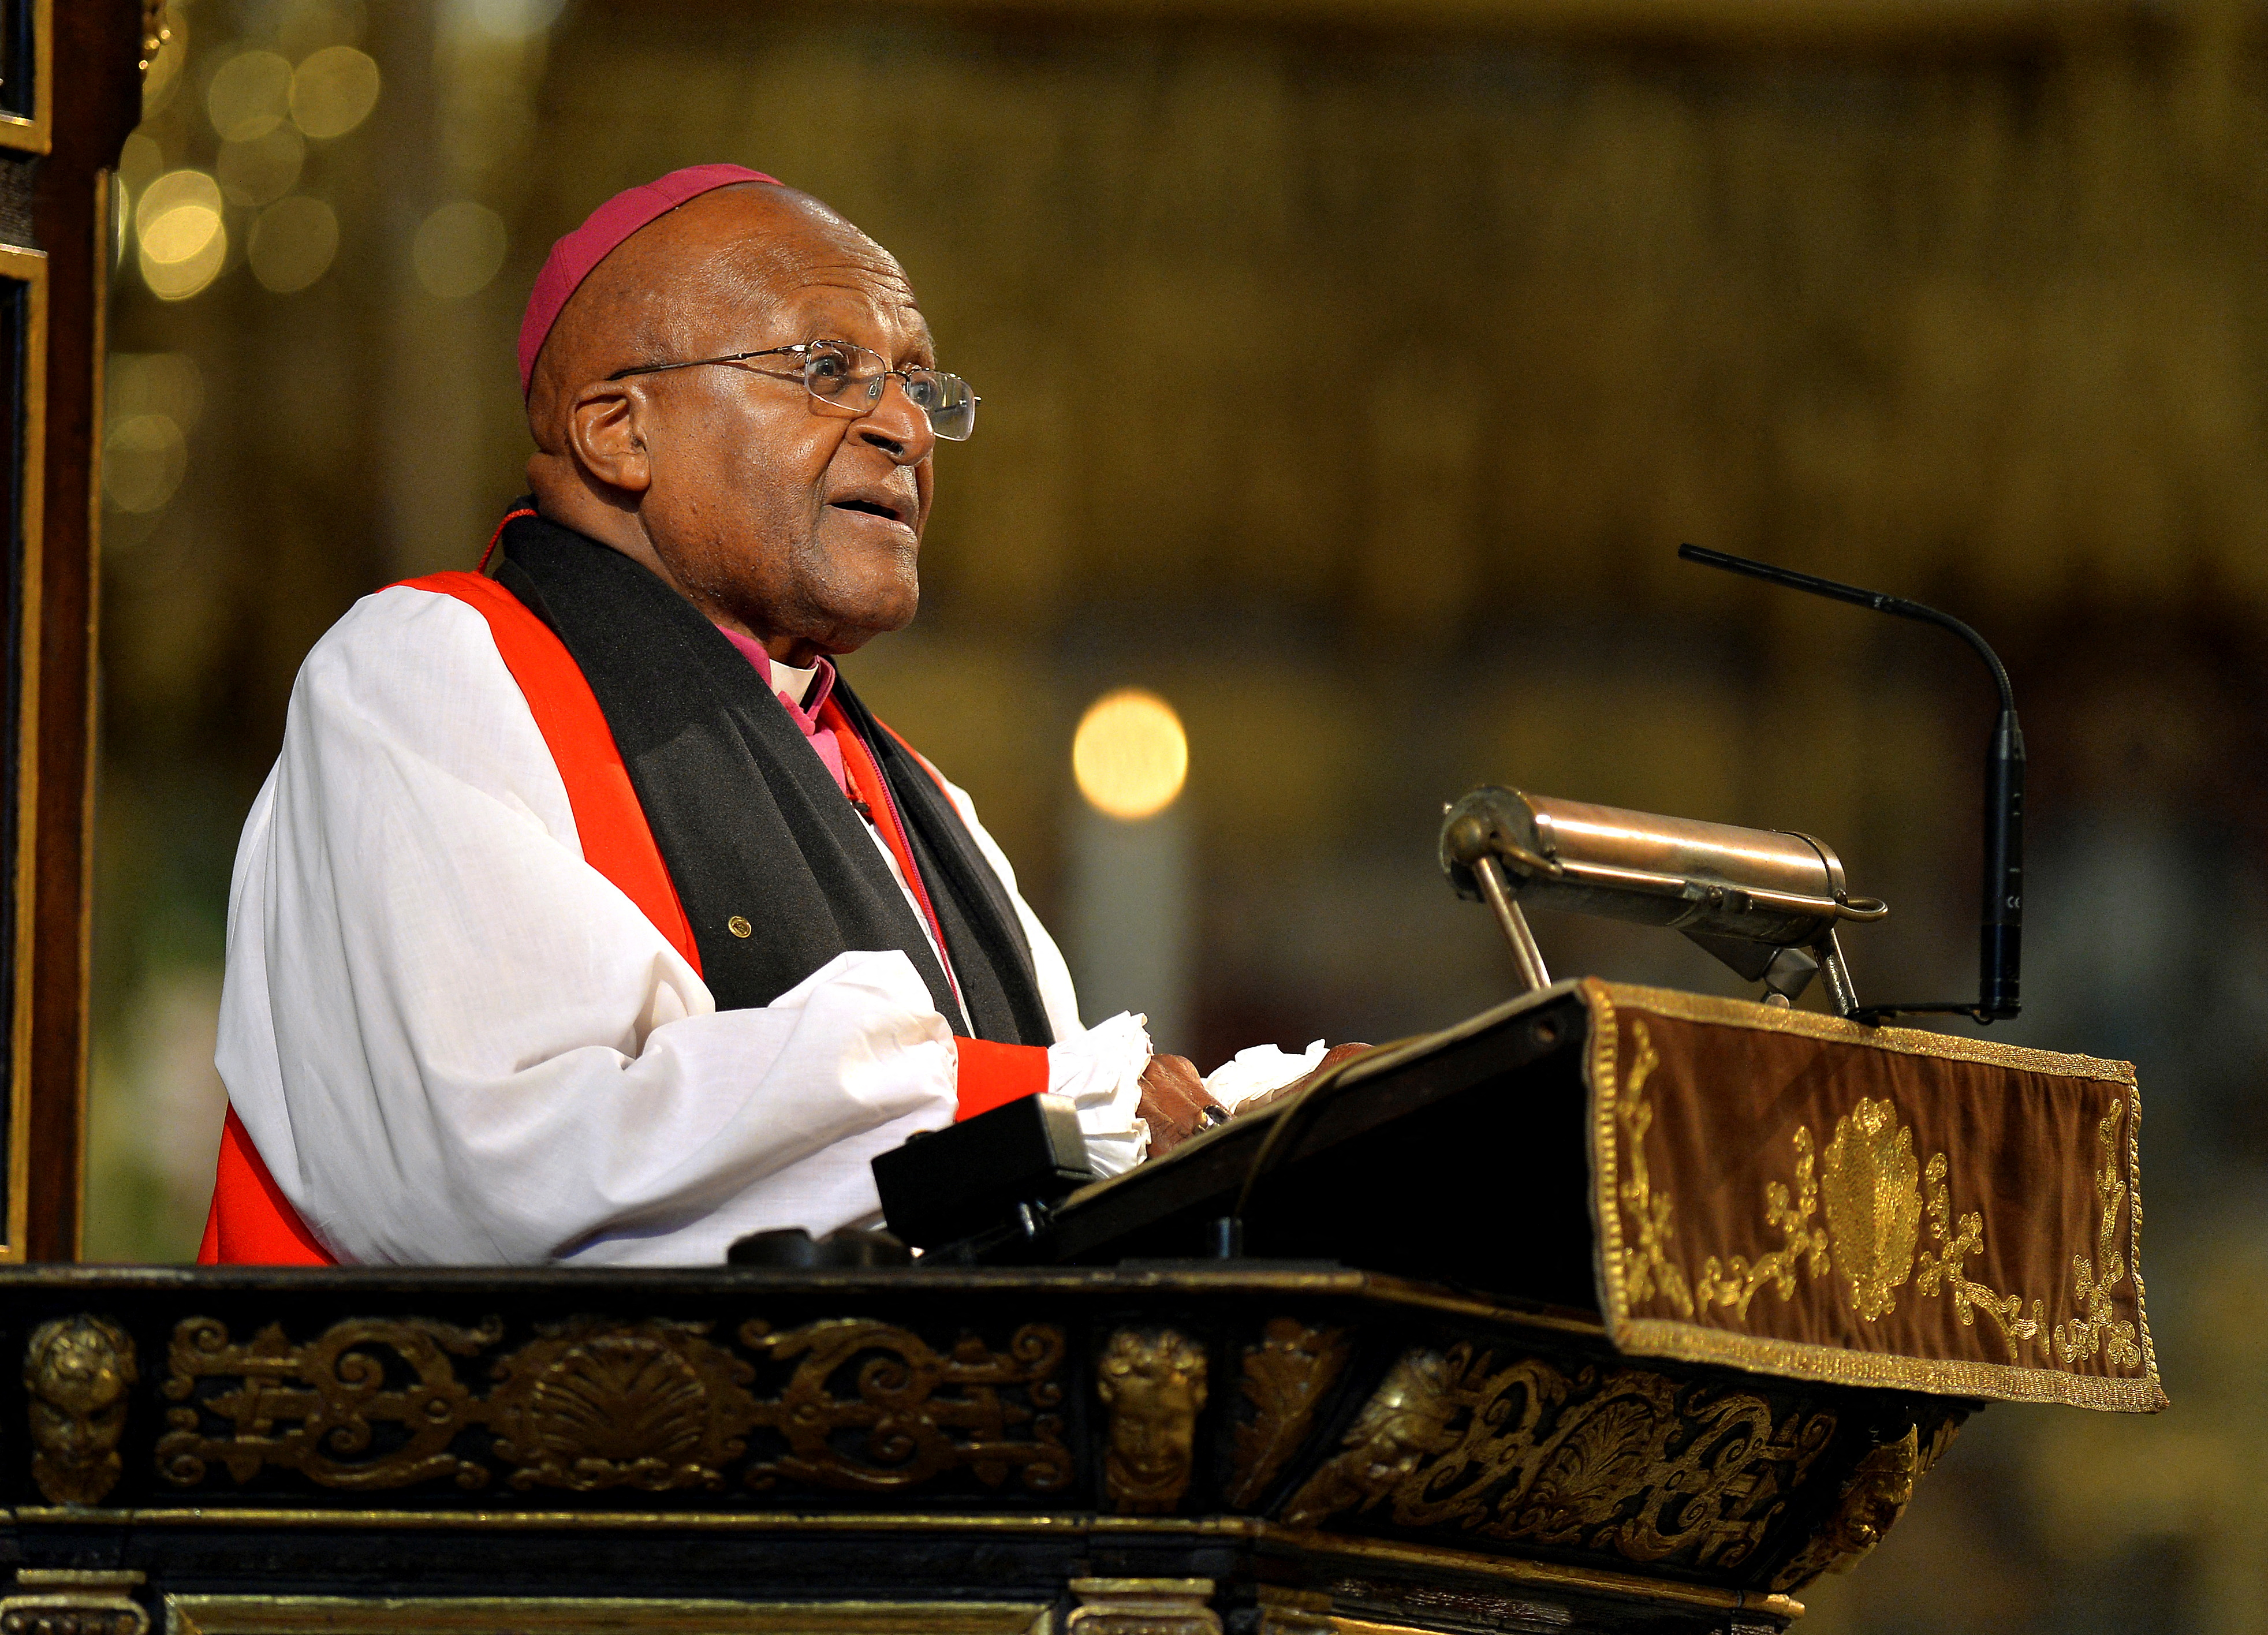 Archbishop Desmond Tutu speaks during a memorial service for former South African President Nelson Mandela at Westminster Abbey in London March 3, 2014. Mandela died on December 5, 2013 at the age of 95. REUTERS/John Stillwell/Pool/File Photo